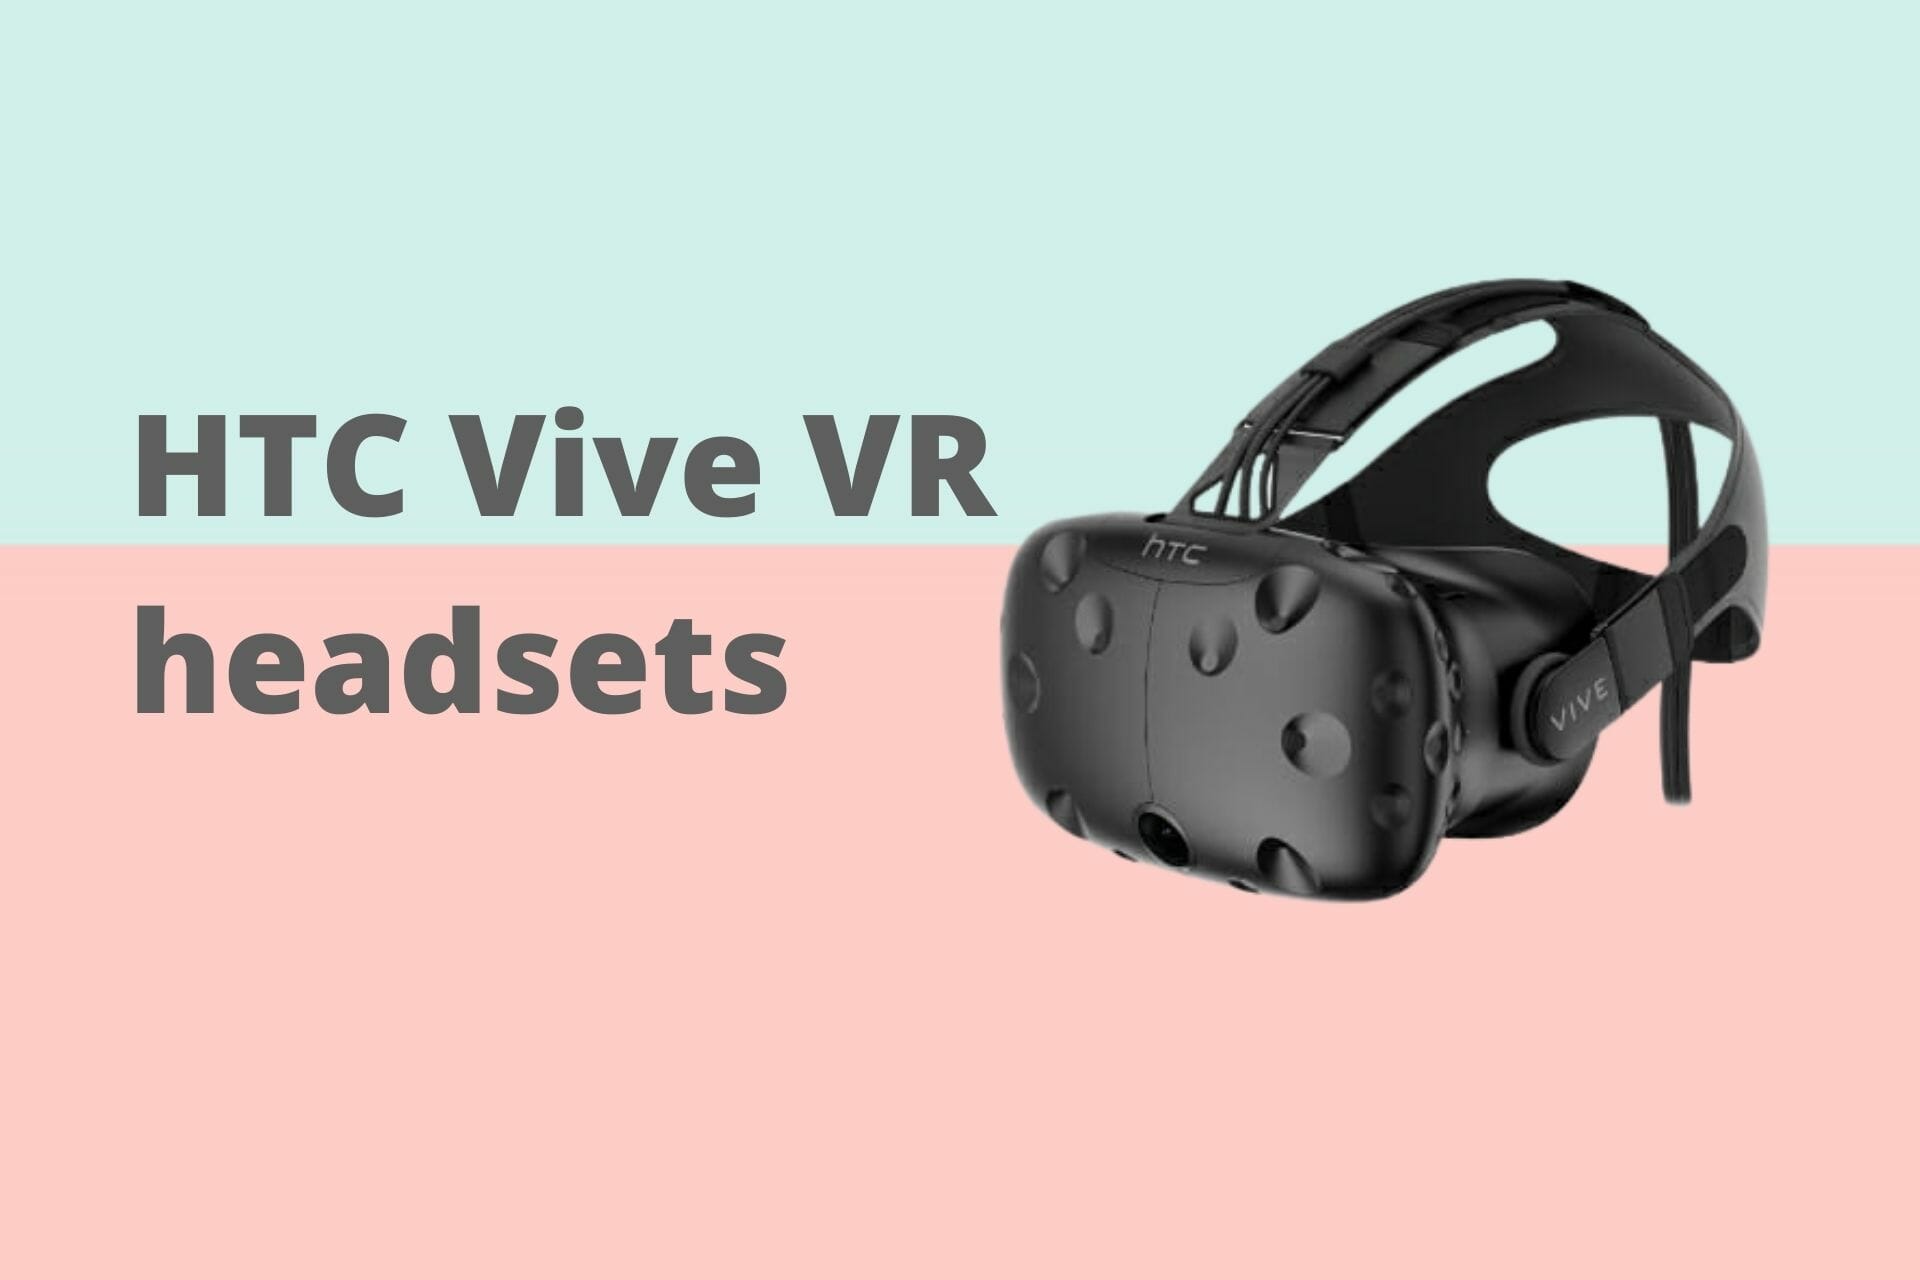 HTC Vive VR headsets holiday sales